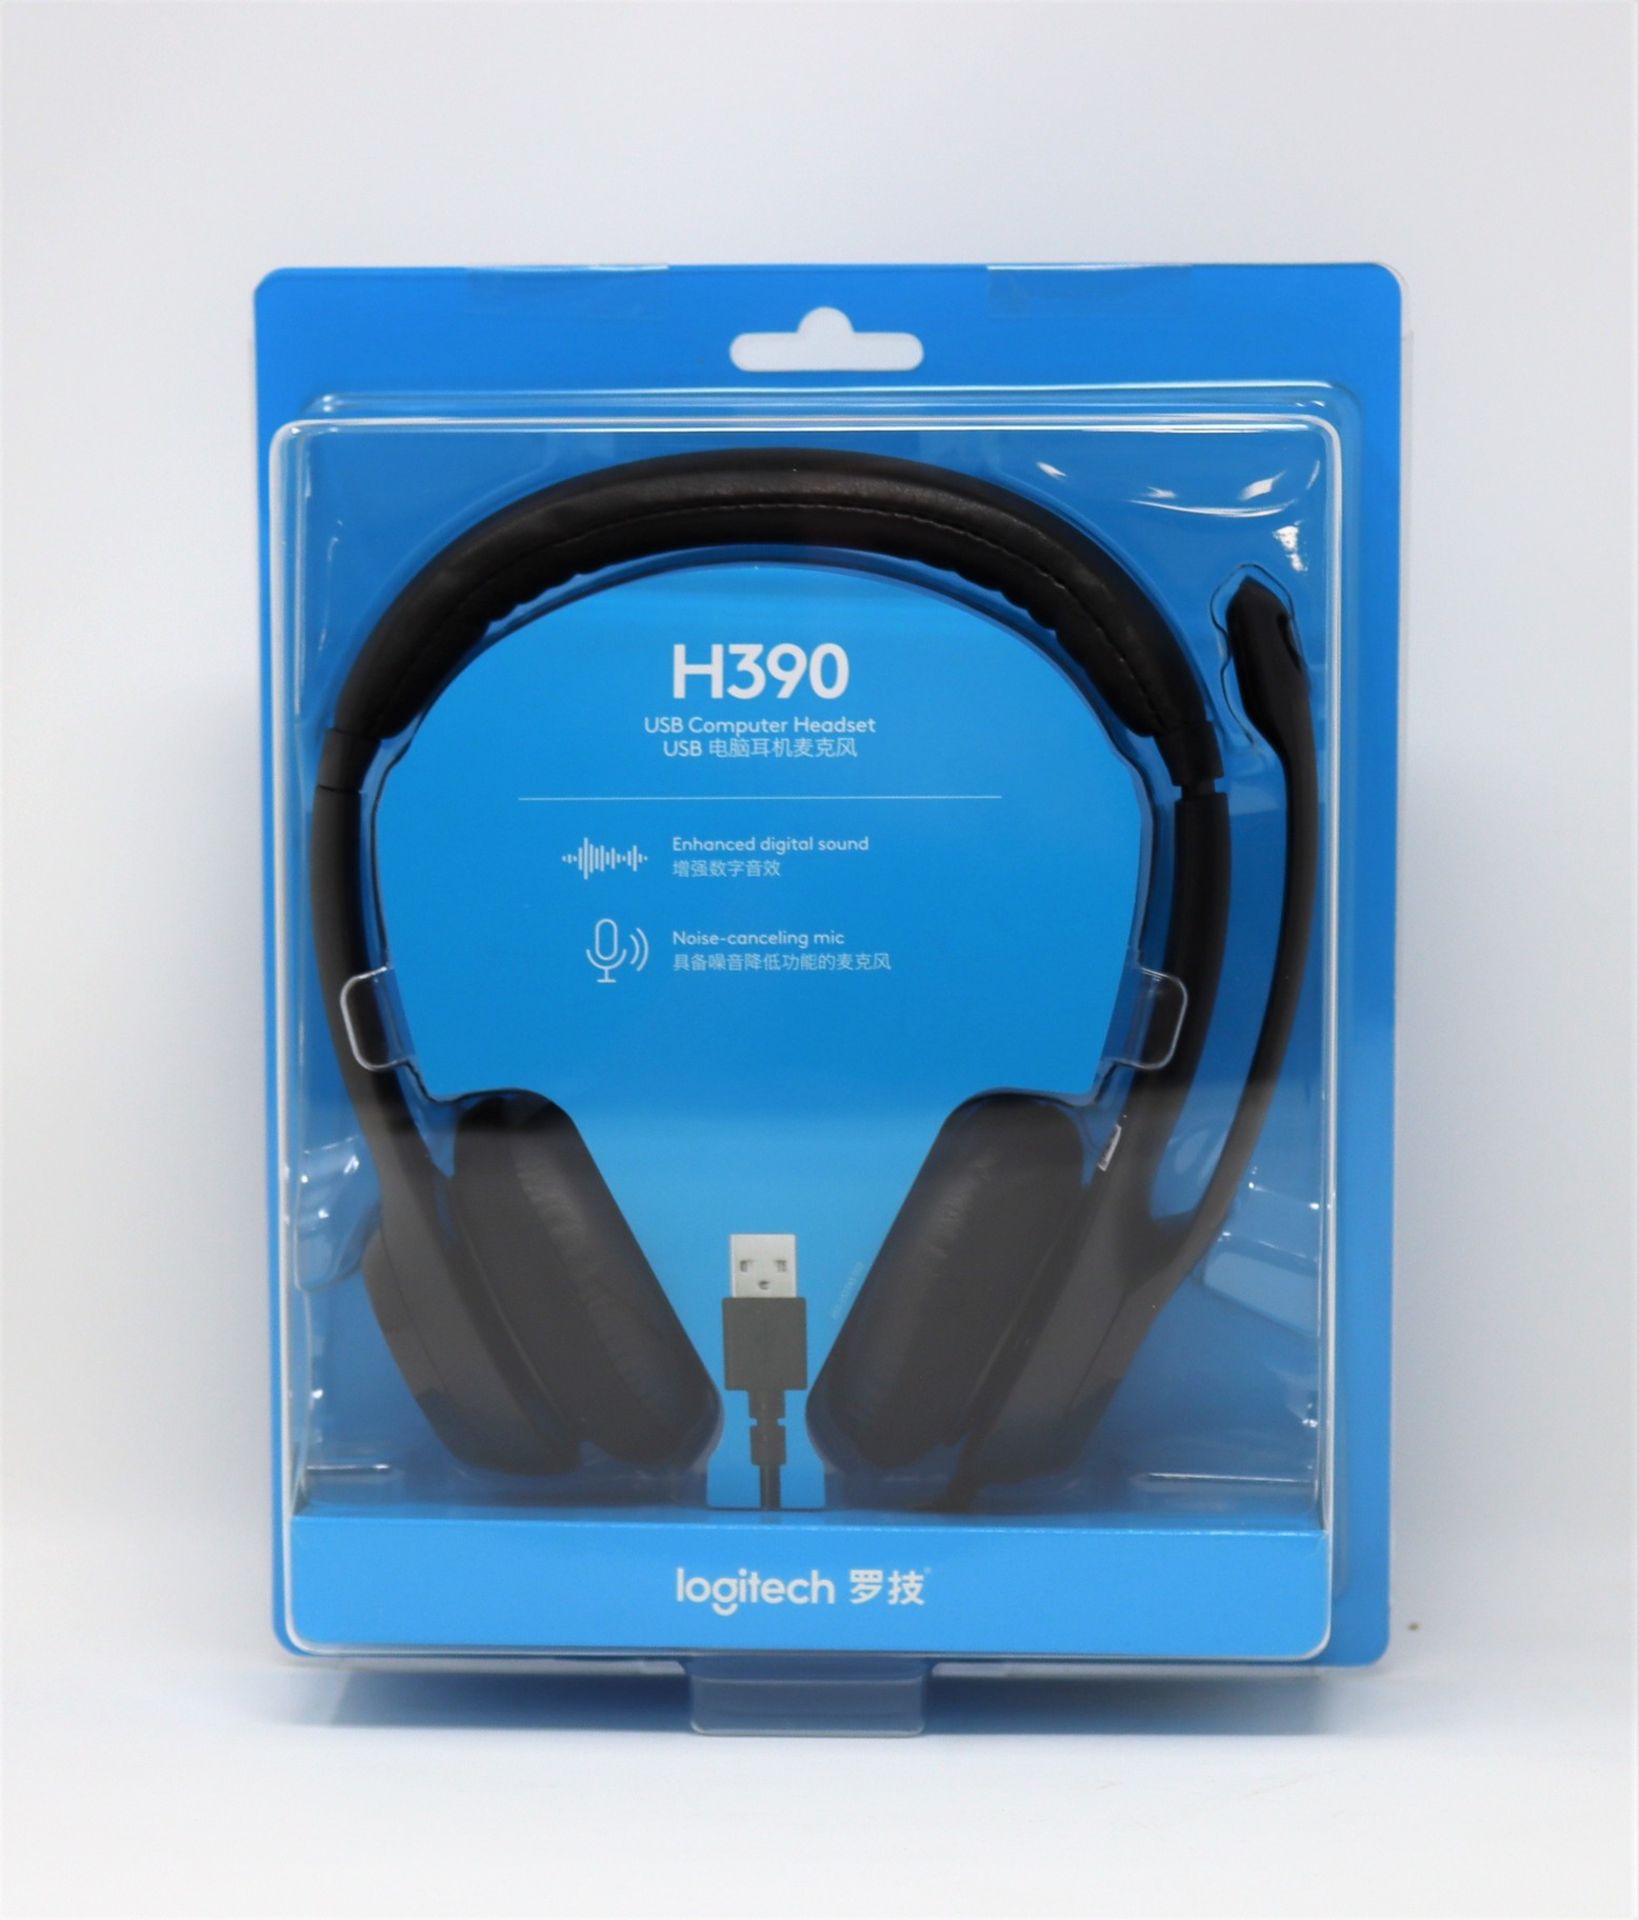 Four as new Logitech H390 USB Headsets (Individual packaging sealed).